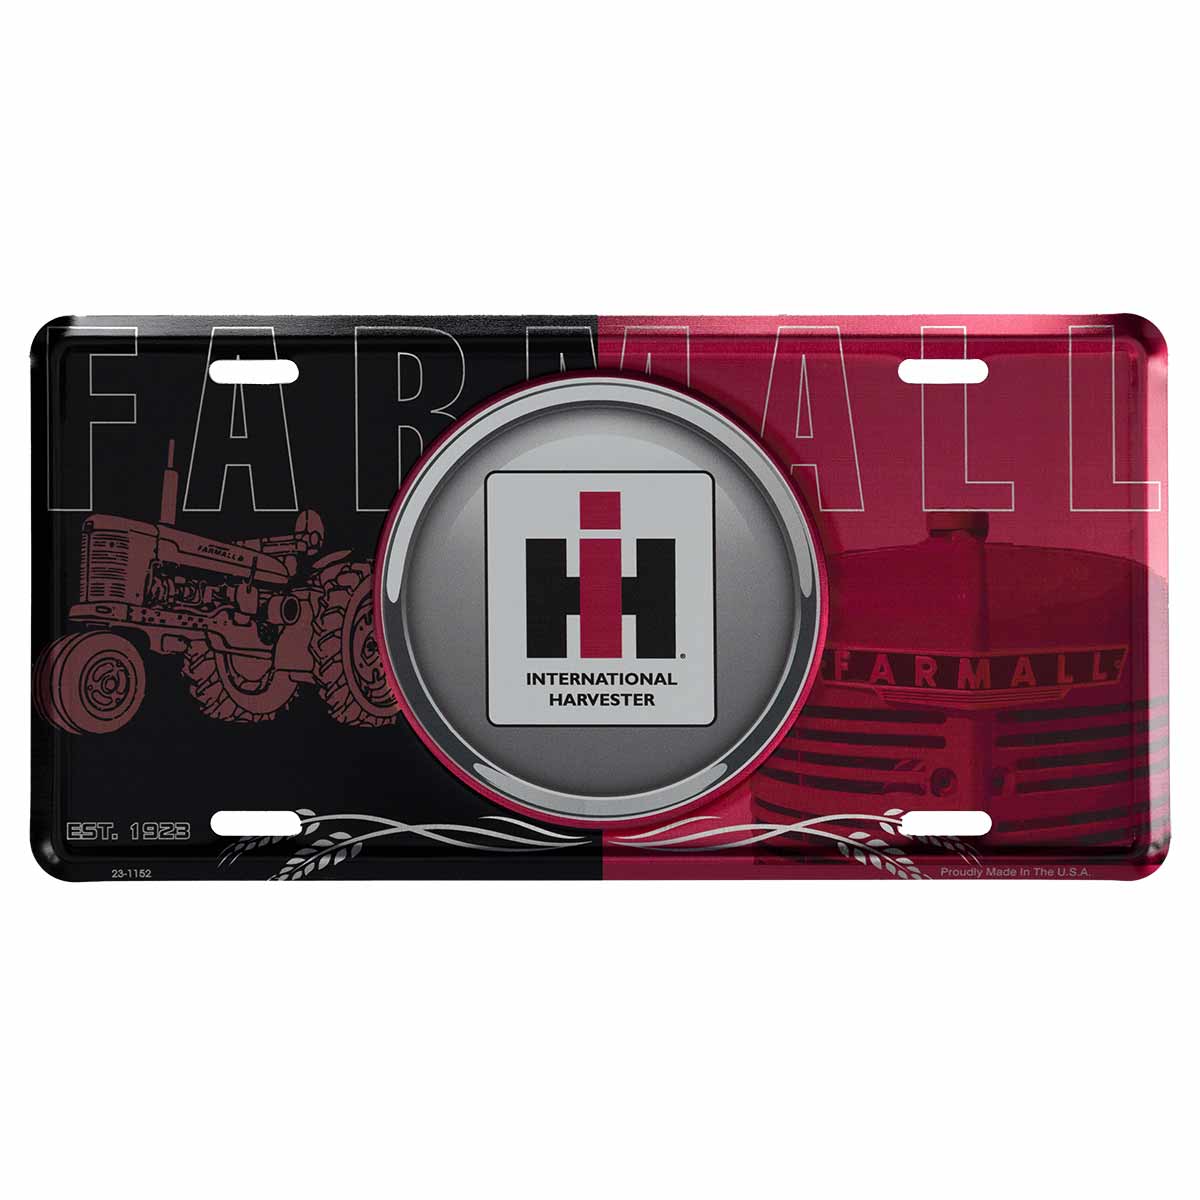 ih farmall black and red license plate